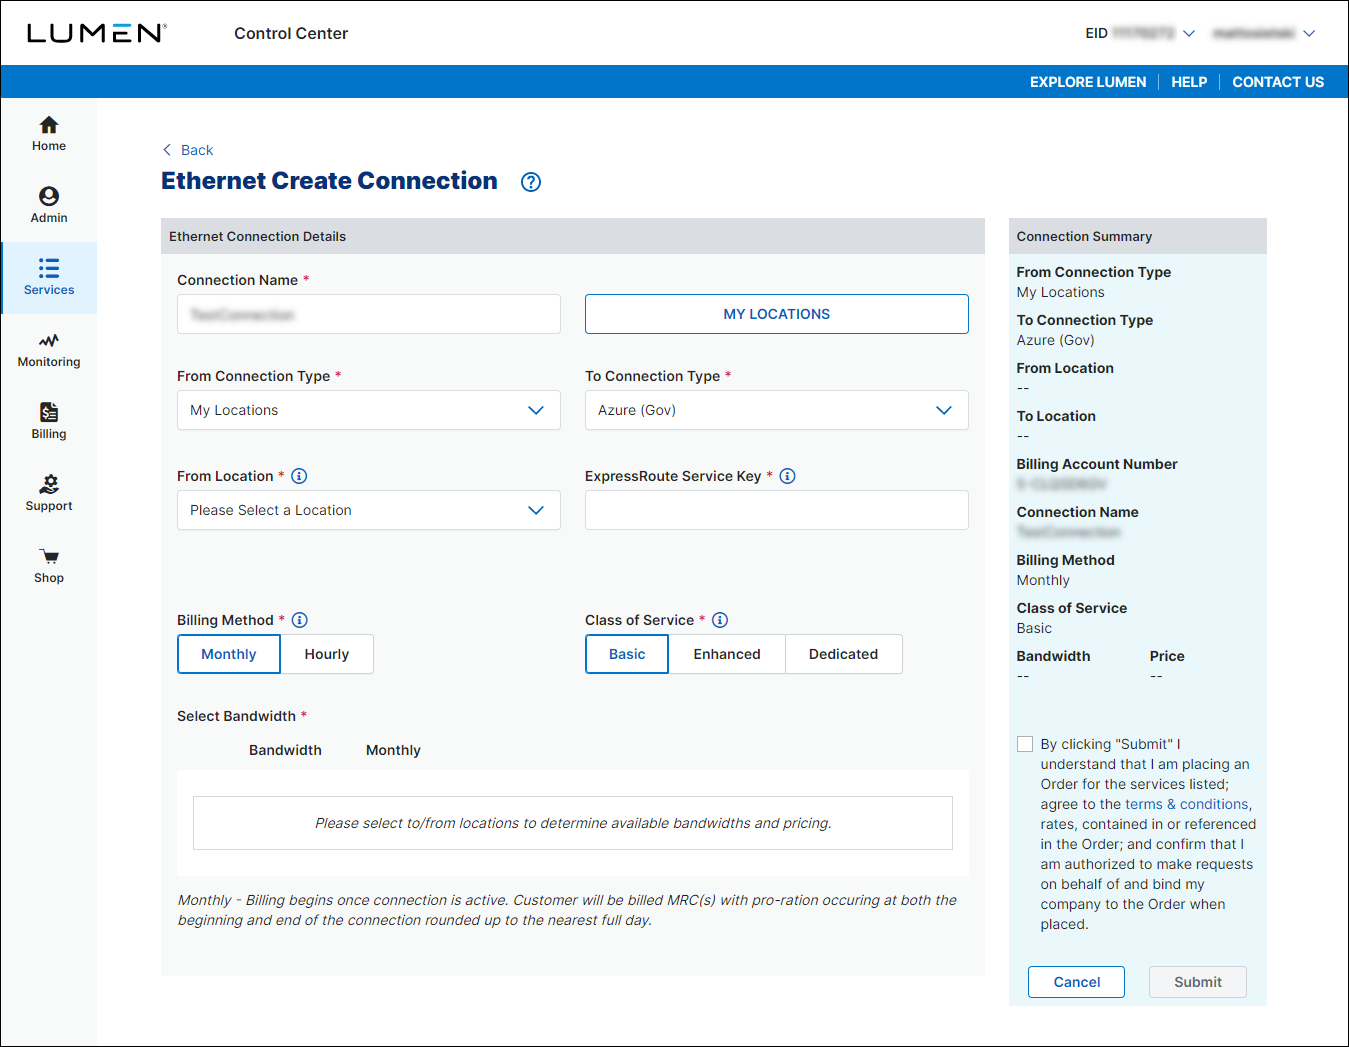 Ethernet Create Connection (showing a connection to Azure Gov)